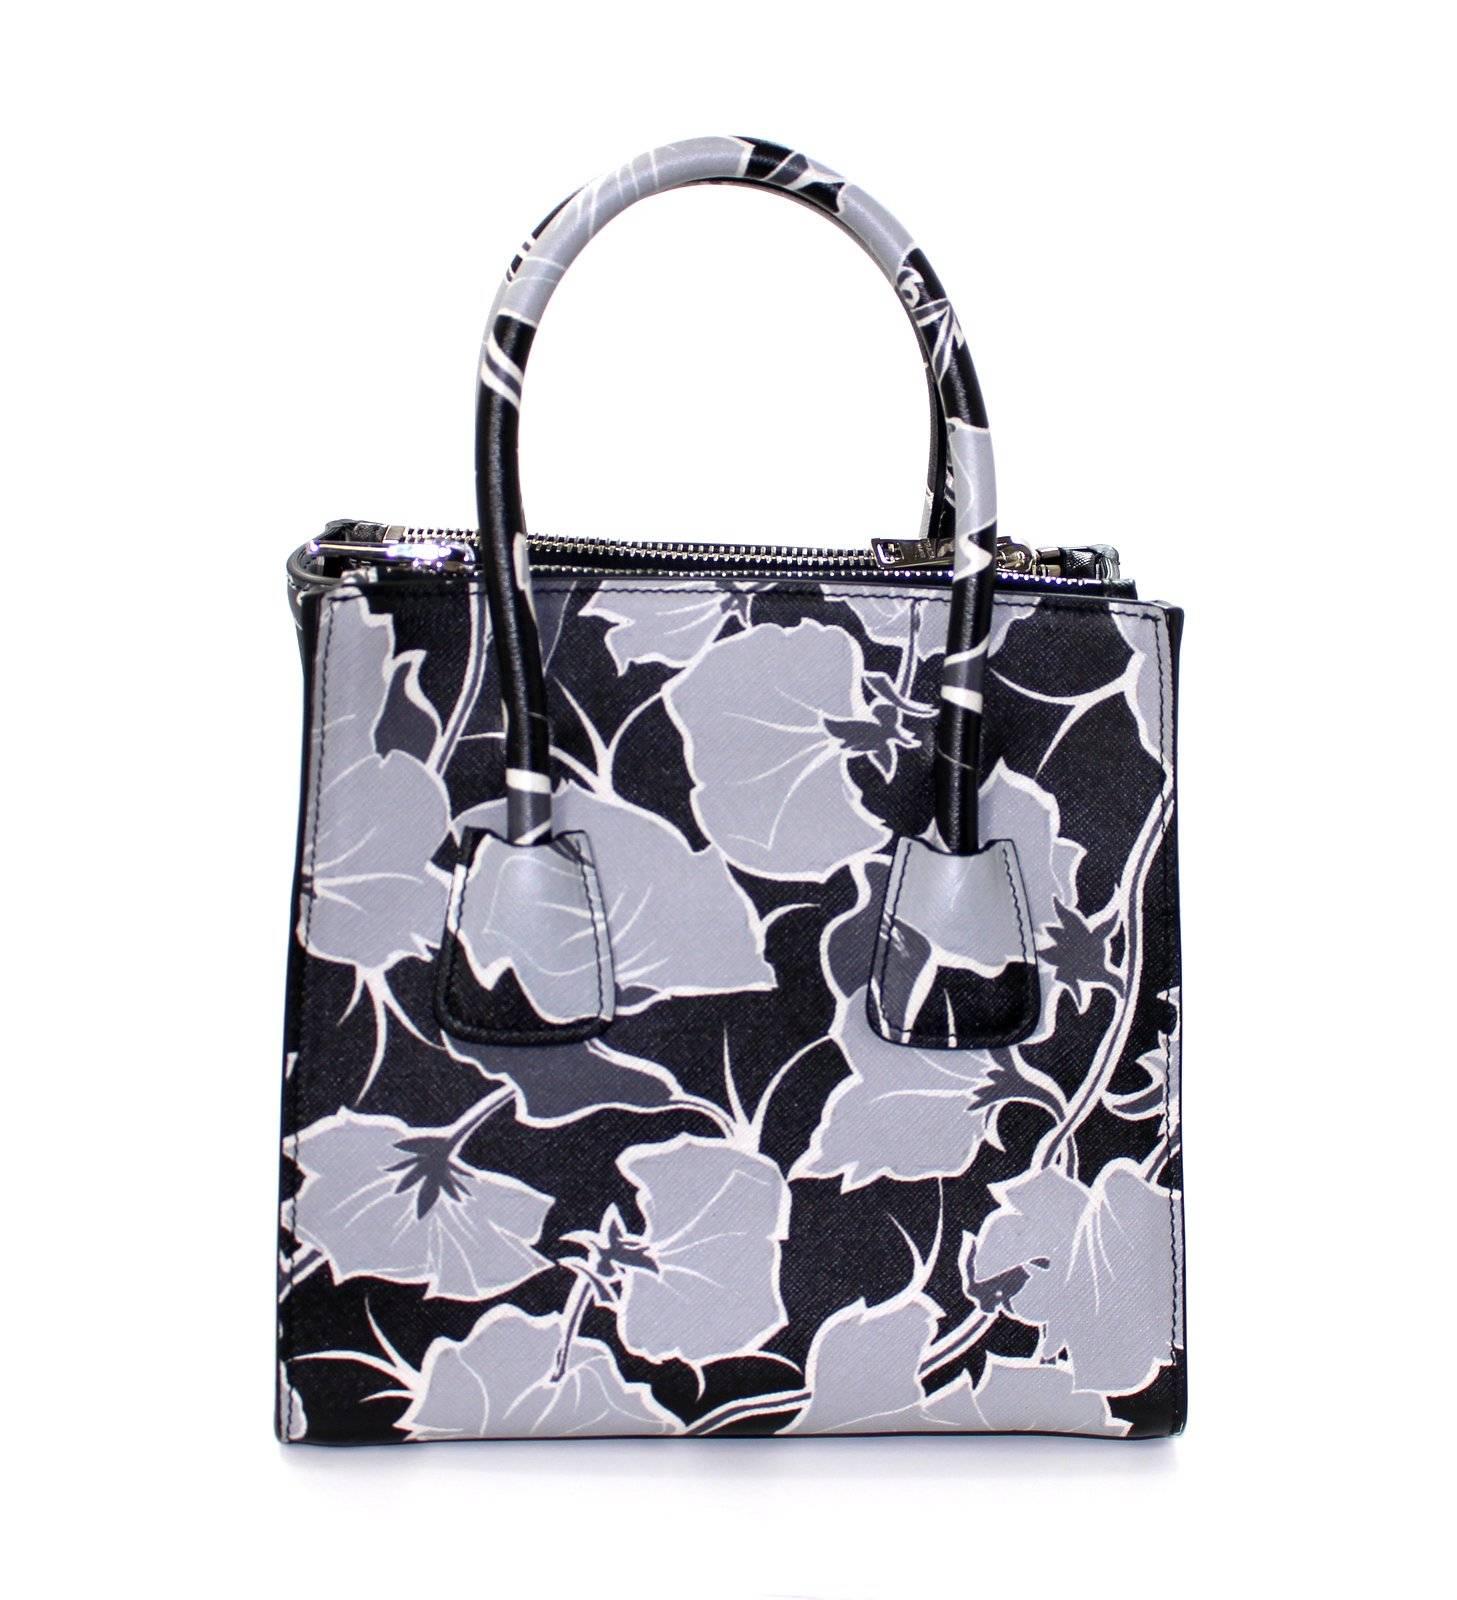 PRADA Grey Floral Saffiano Twin Pocket Tote- NEW, Never Carried!  Estimated current value $2,500.00.
Especially pretty thanks to the unique exploded floral pattern, this Prada also has a variable silhouette with “wings” that may be tucked or flared